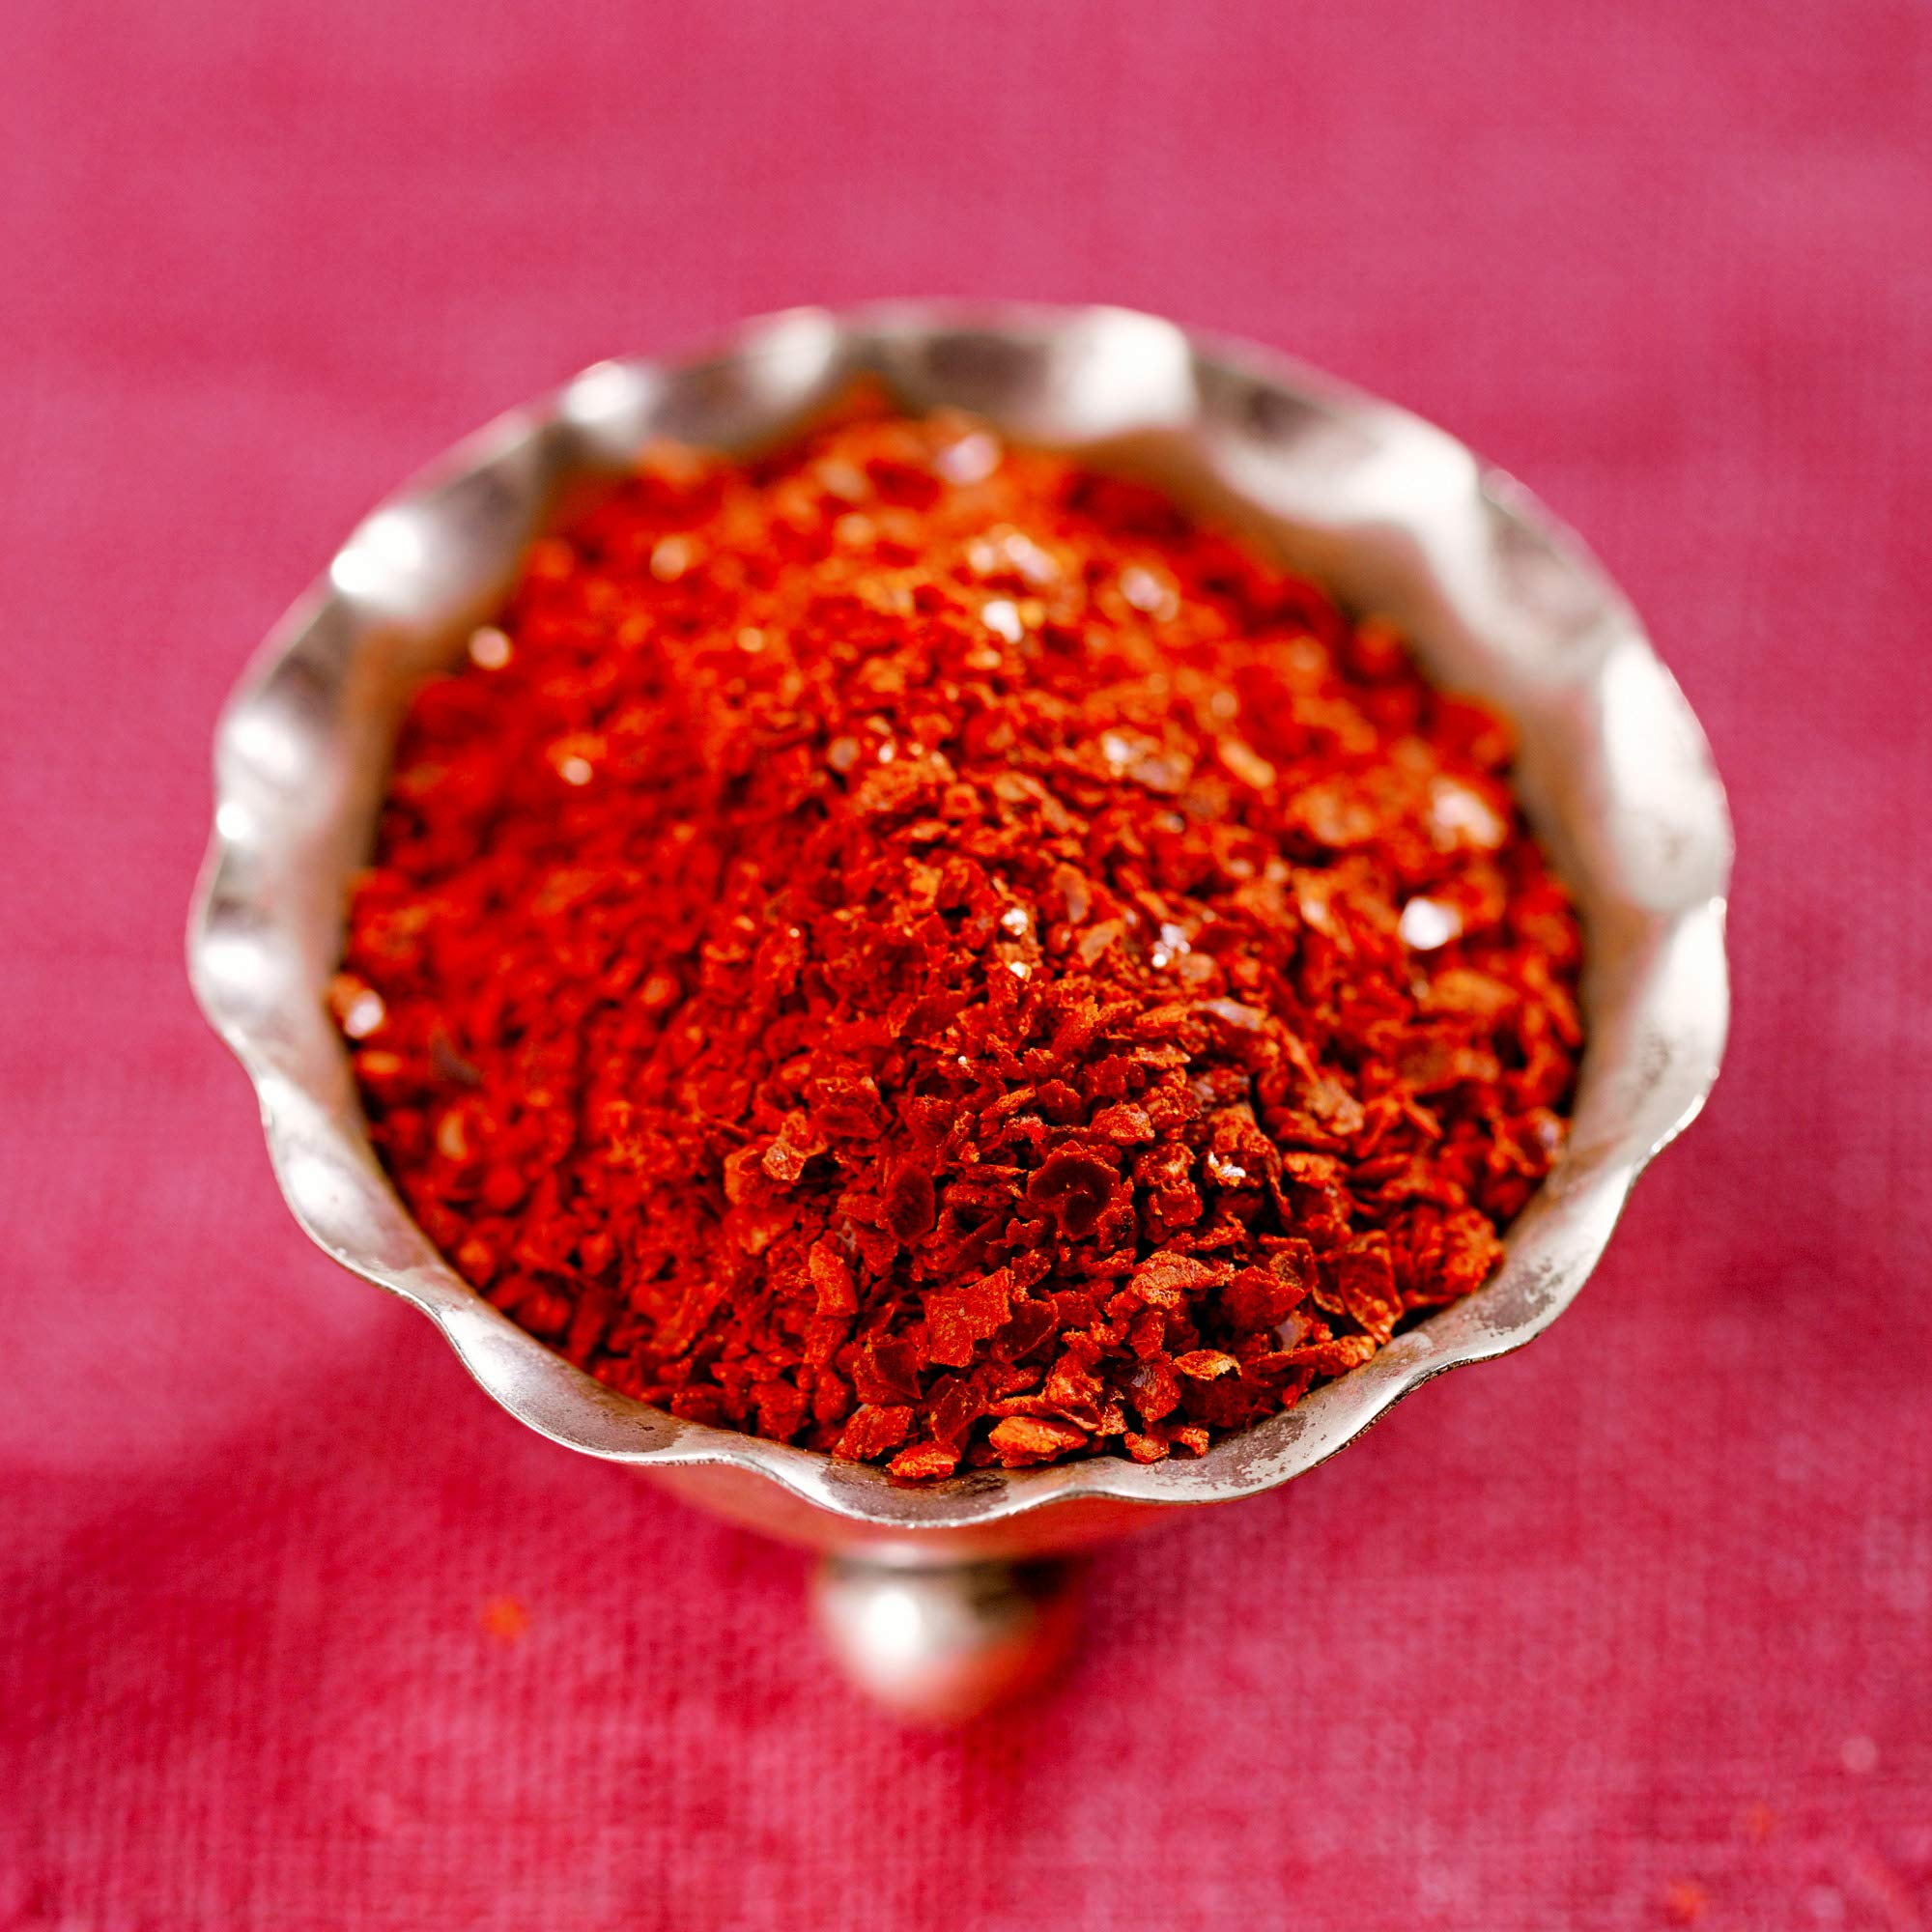 Red Chili Flakes (Aleppo-Style)